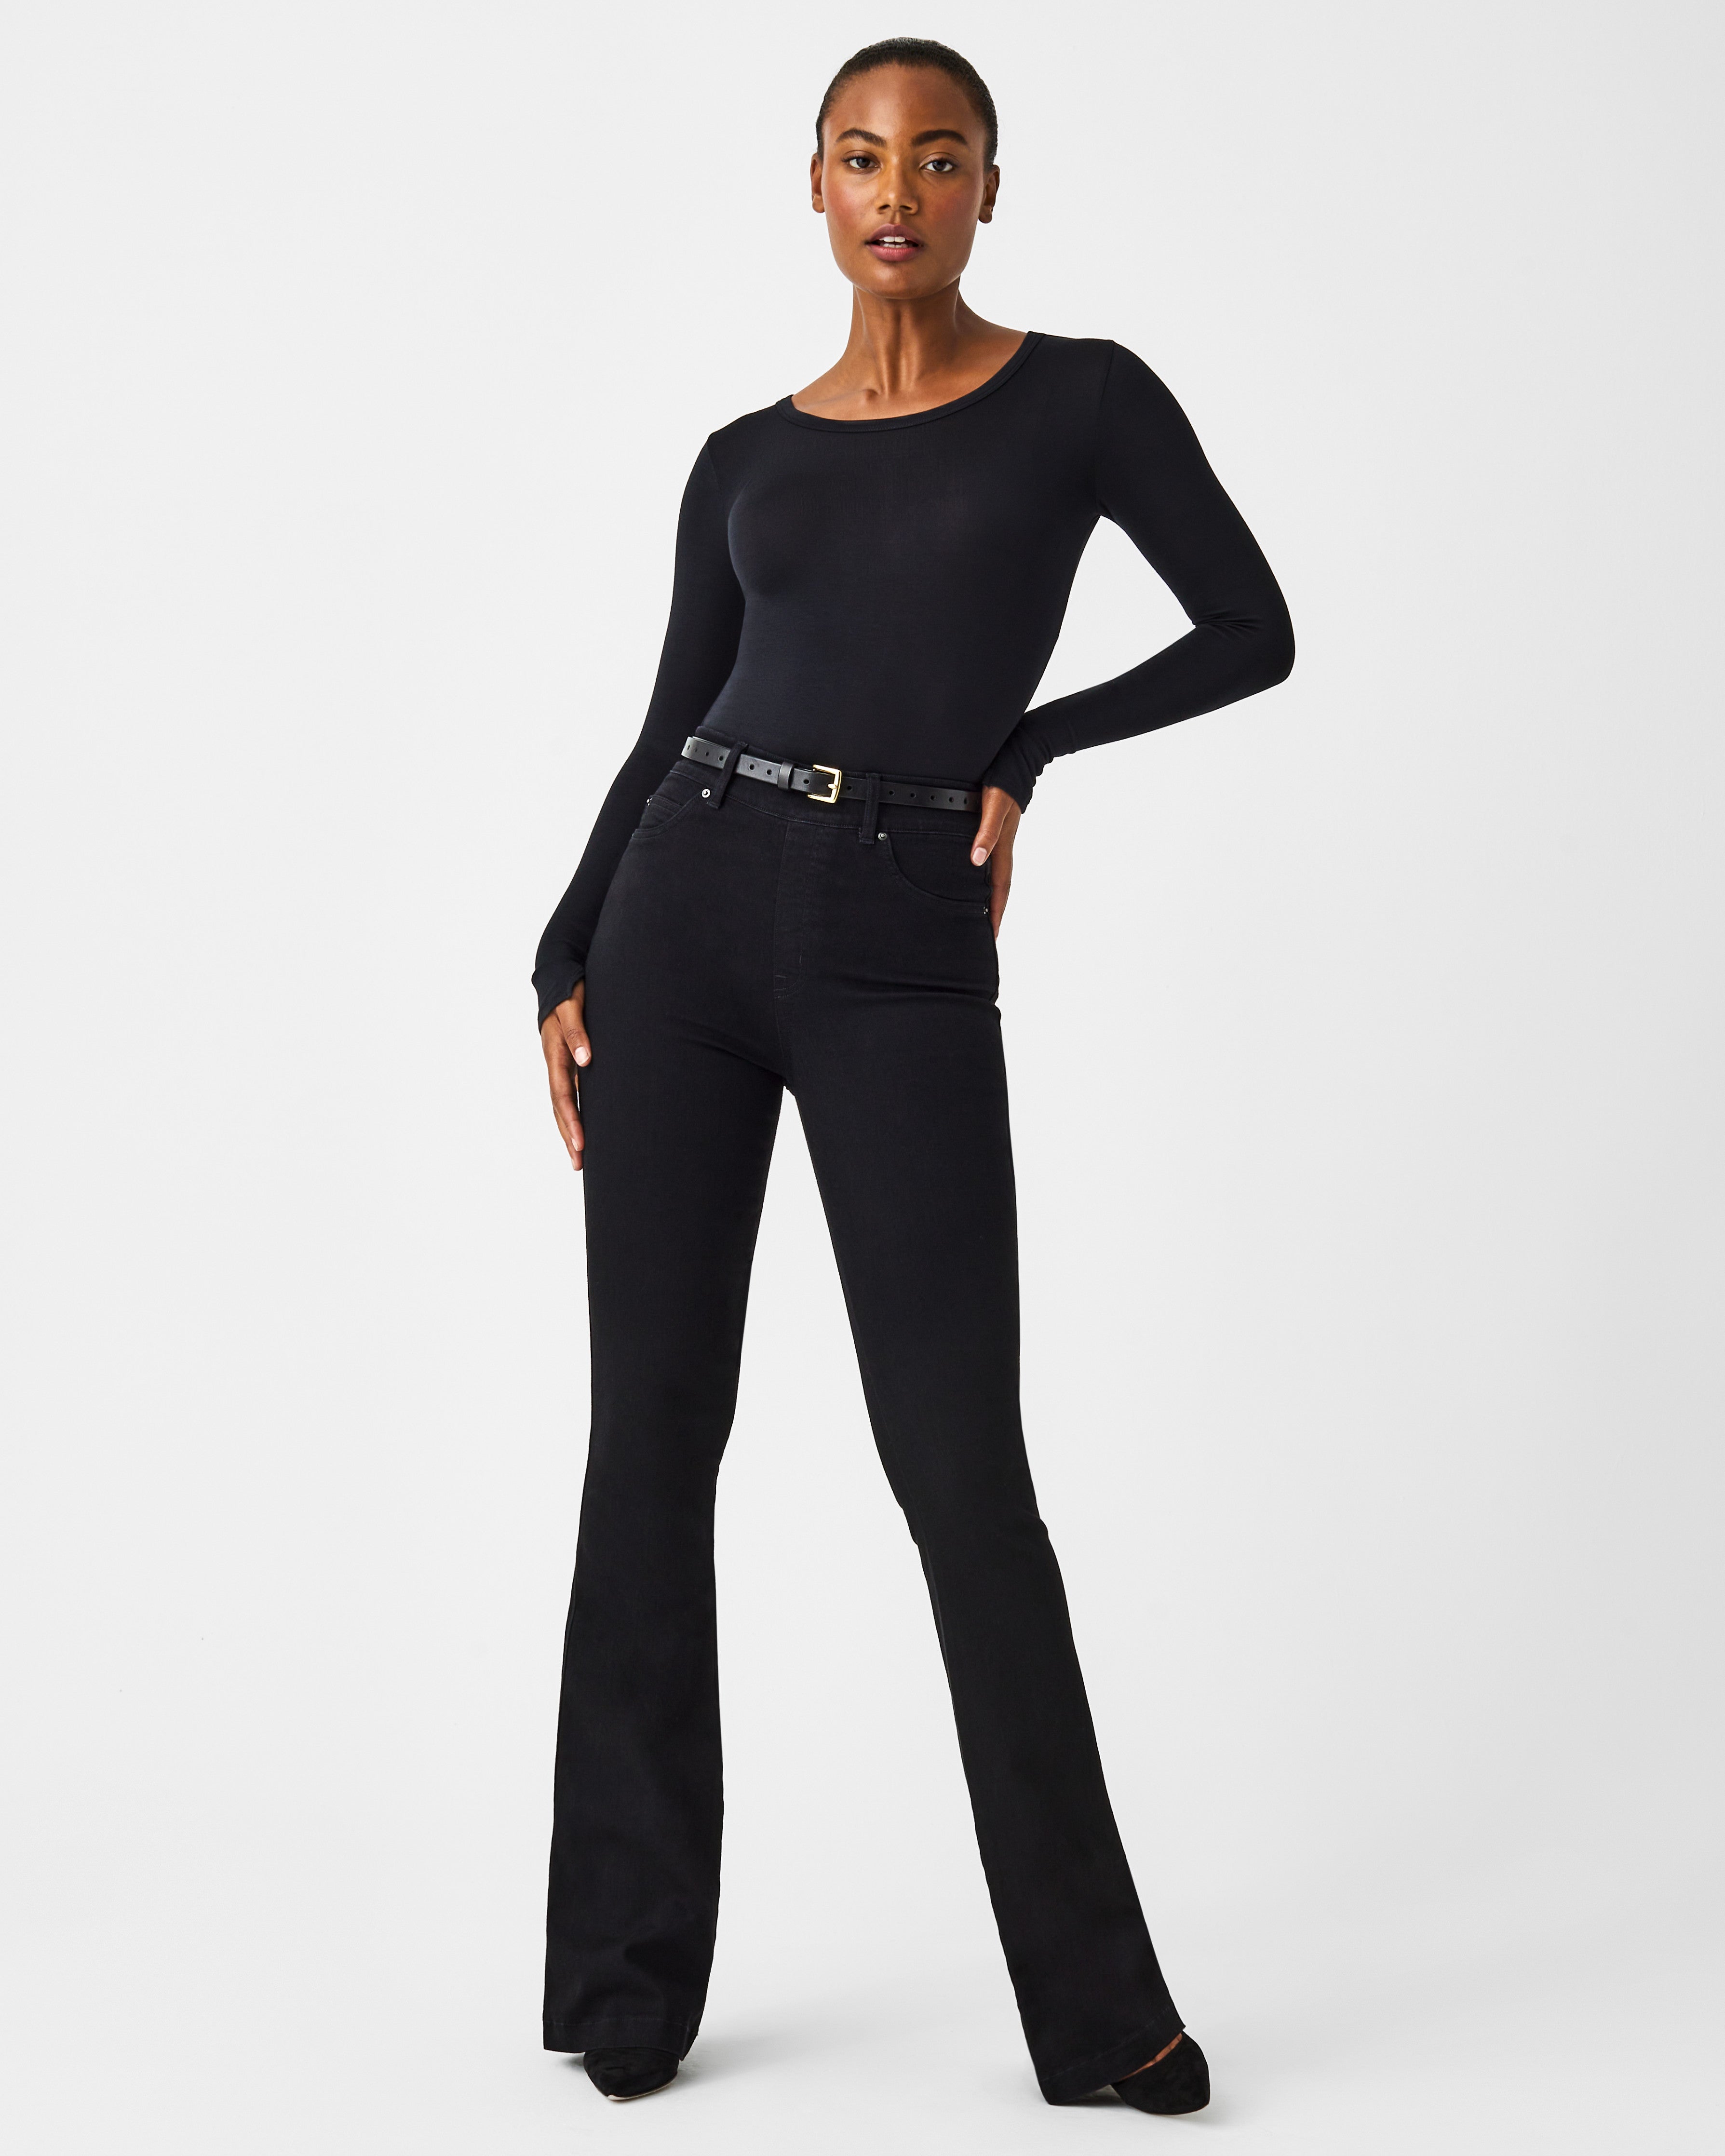 SPANX Solid Black Jeans Size M - 60% off